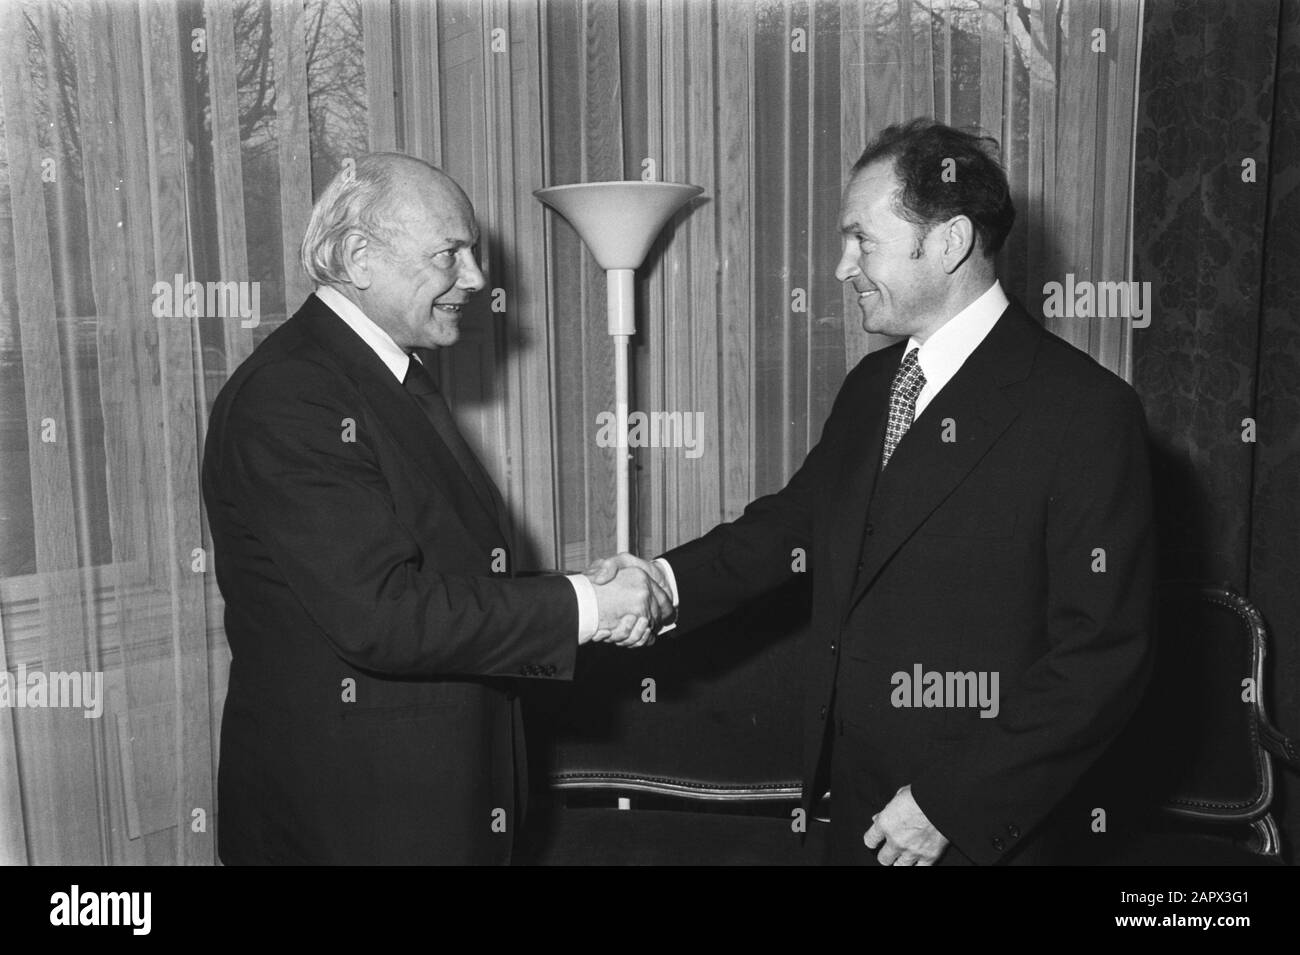 Premier Den Uyl receives Foreign Minister of the GDR, Oskar Fischer; greeting Date: January 24, 1977 Location: D.D.R., Germany Keywords: greetings, receipts Personal name: Uyl, Joop den Stock Photo